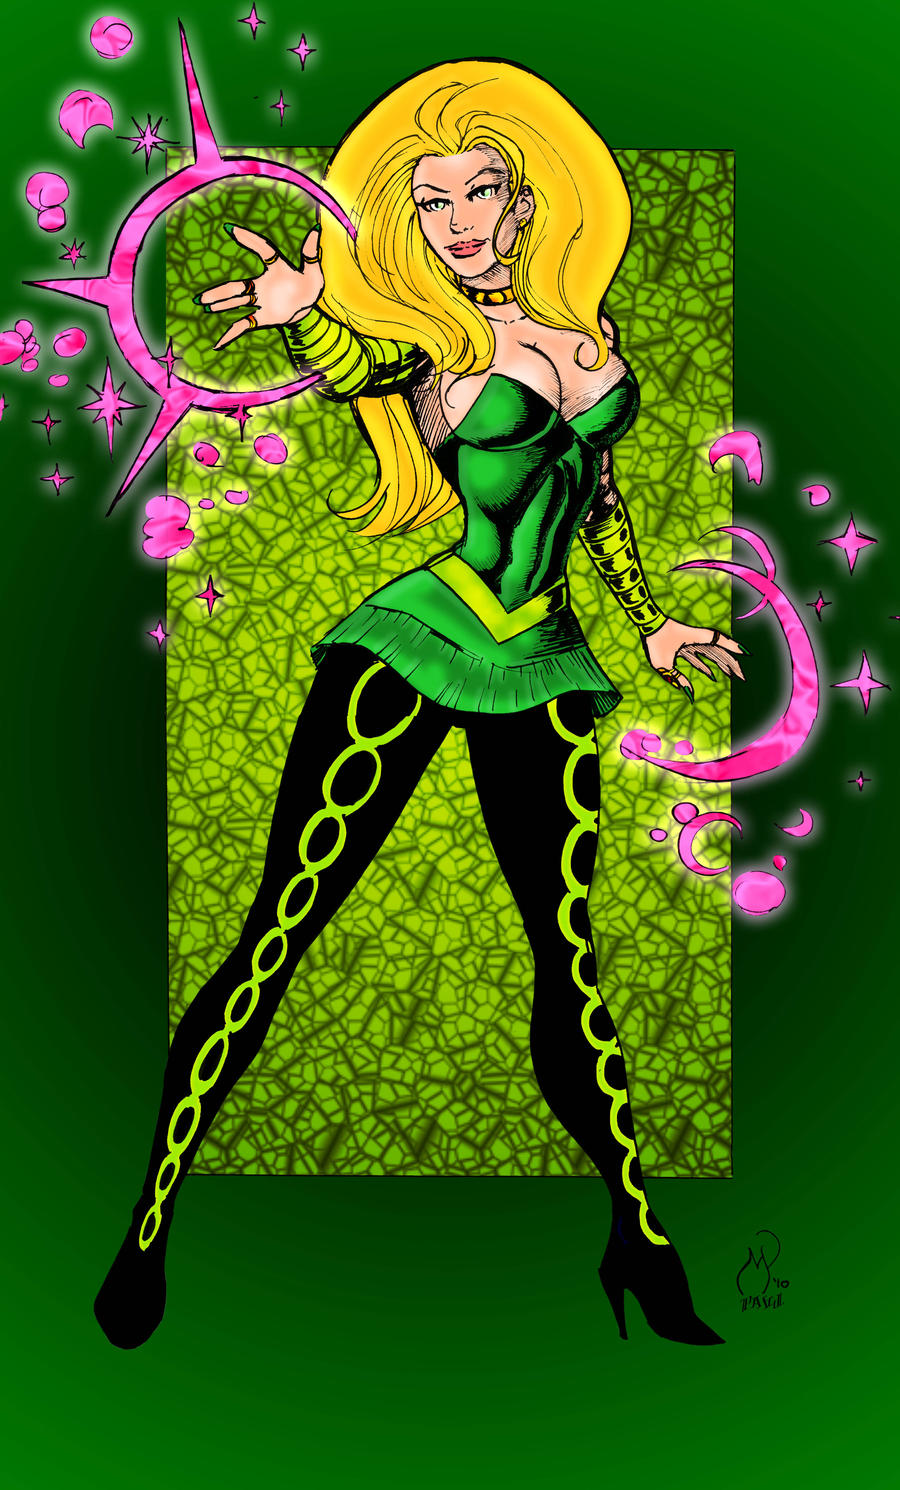 The Enchantress by pascal-verhoef on DeviantArt